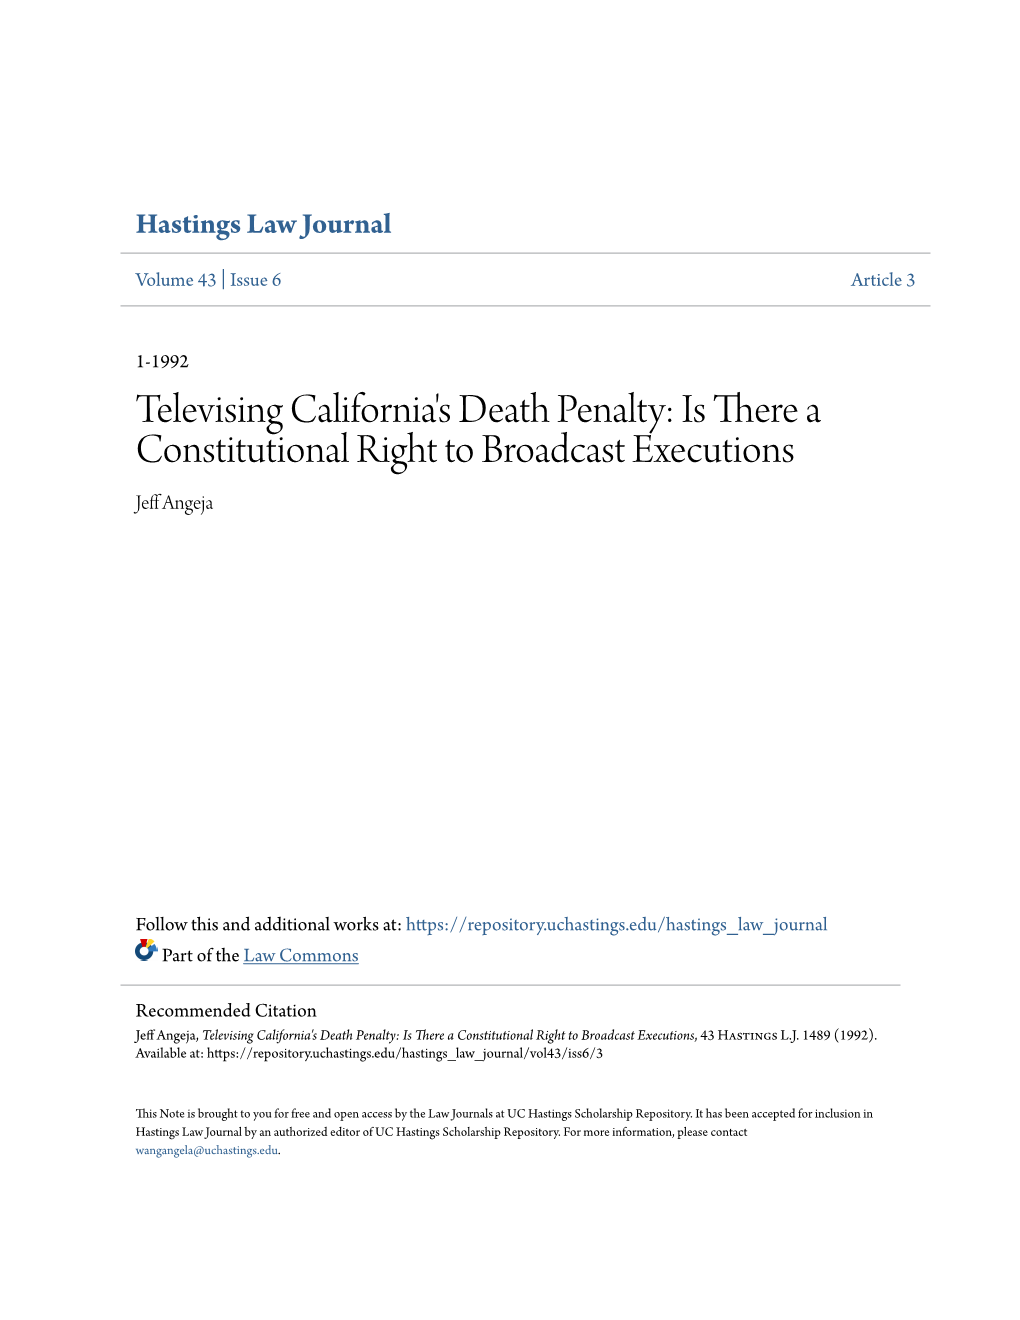 Televising California's Death Penalty: Is There a Constitutional Right to Broadcast Executions Jeff Angeja